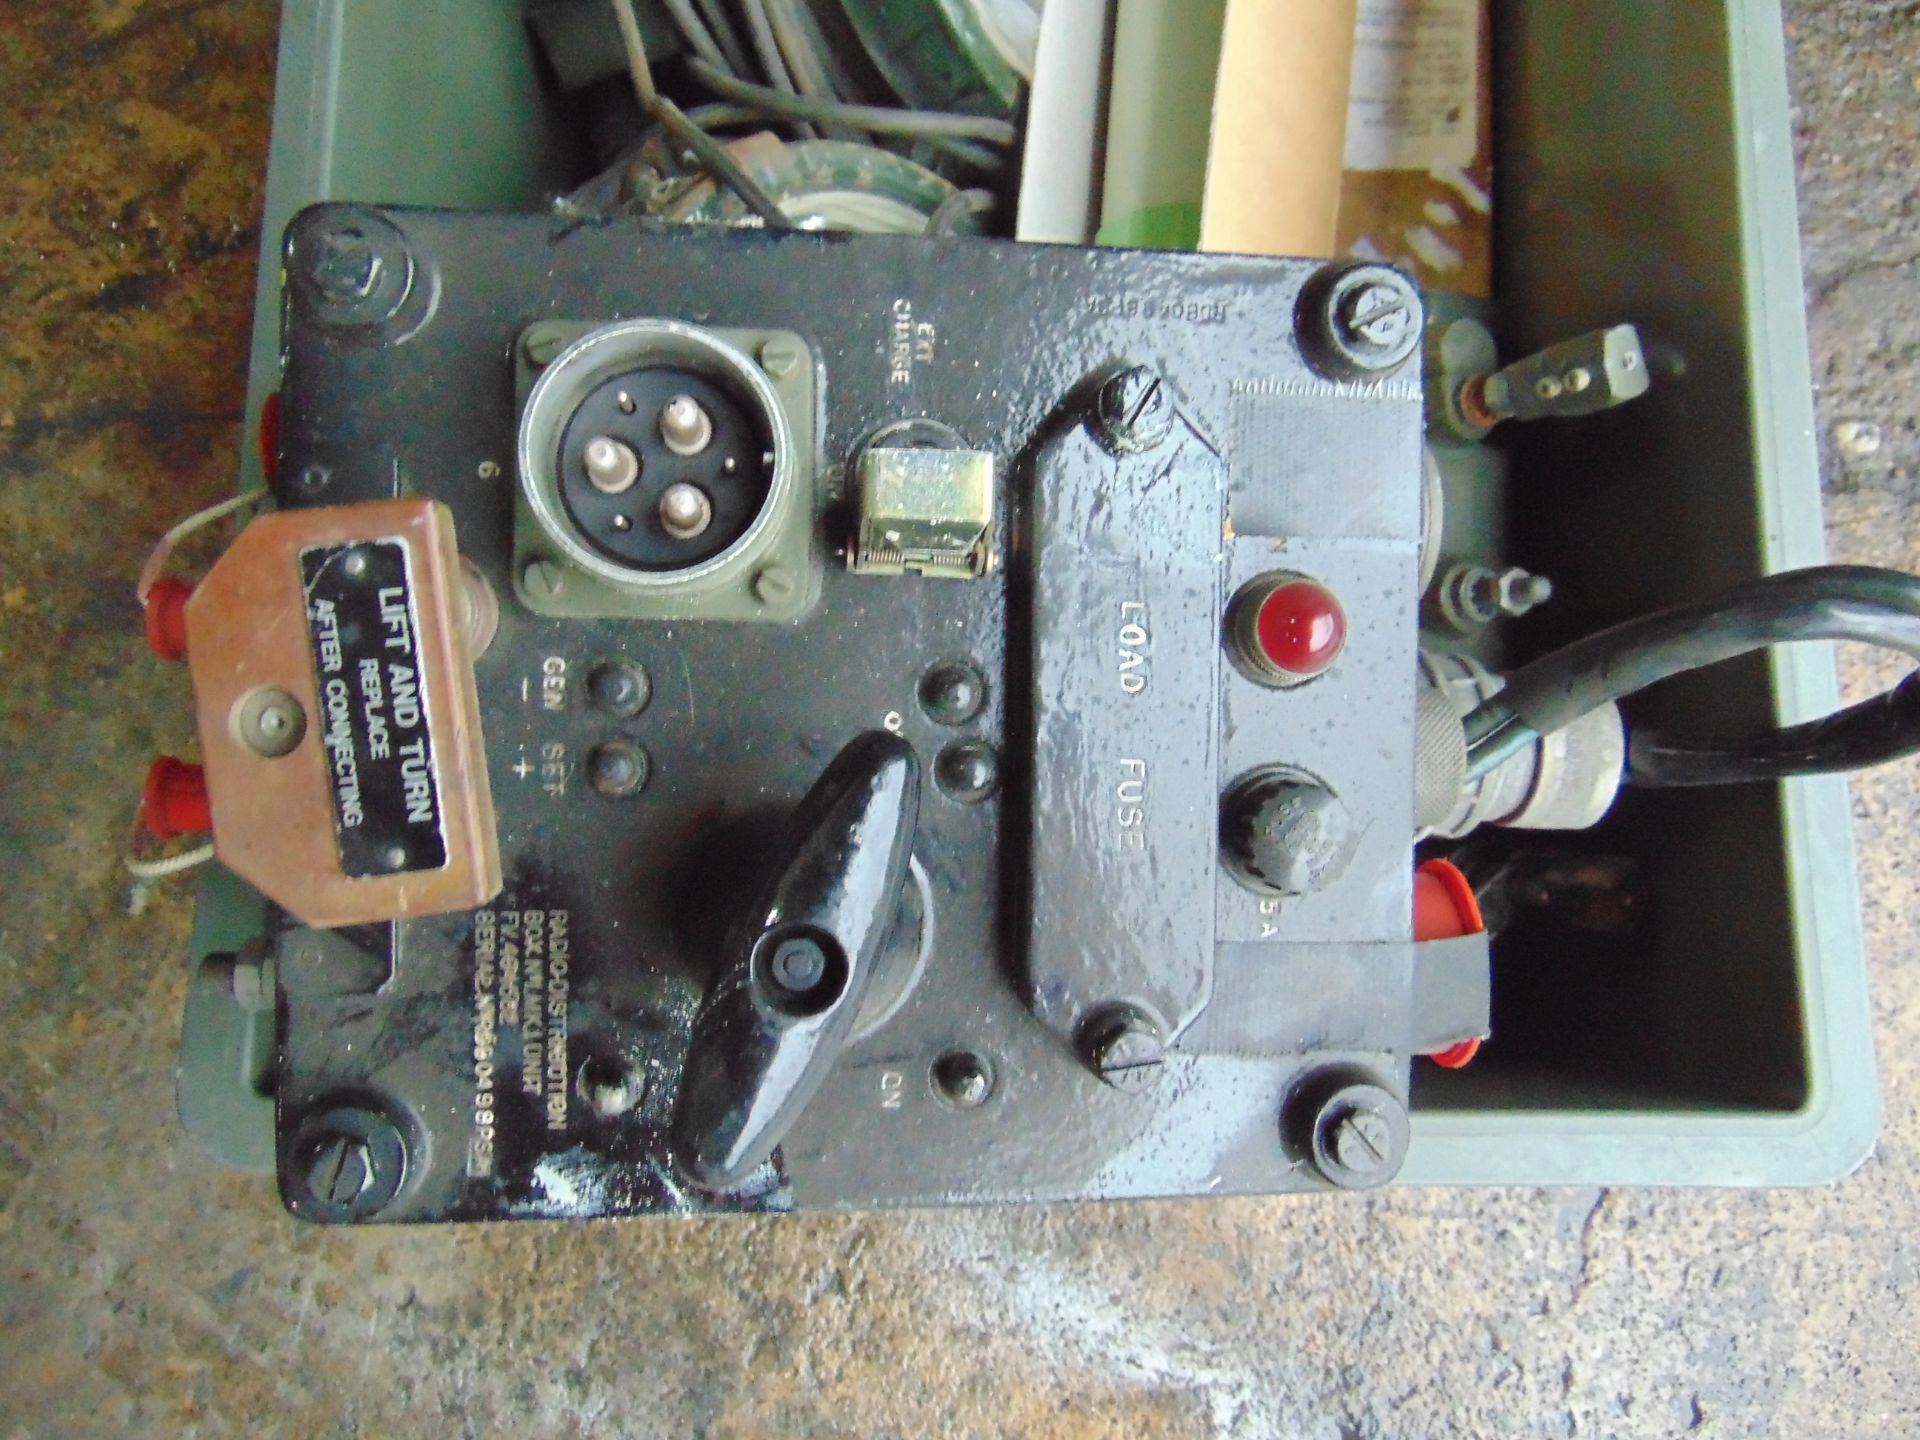 FV 432 Electrical Box, Wiper Motors, Spot Lamps, Smoke Discharge Testers - Image 3 of 6